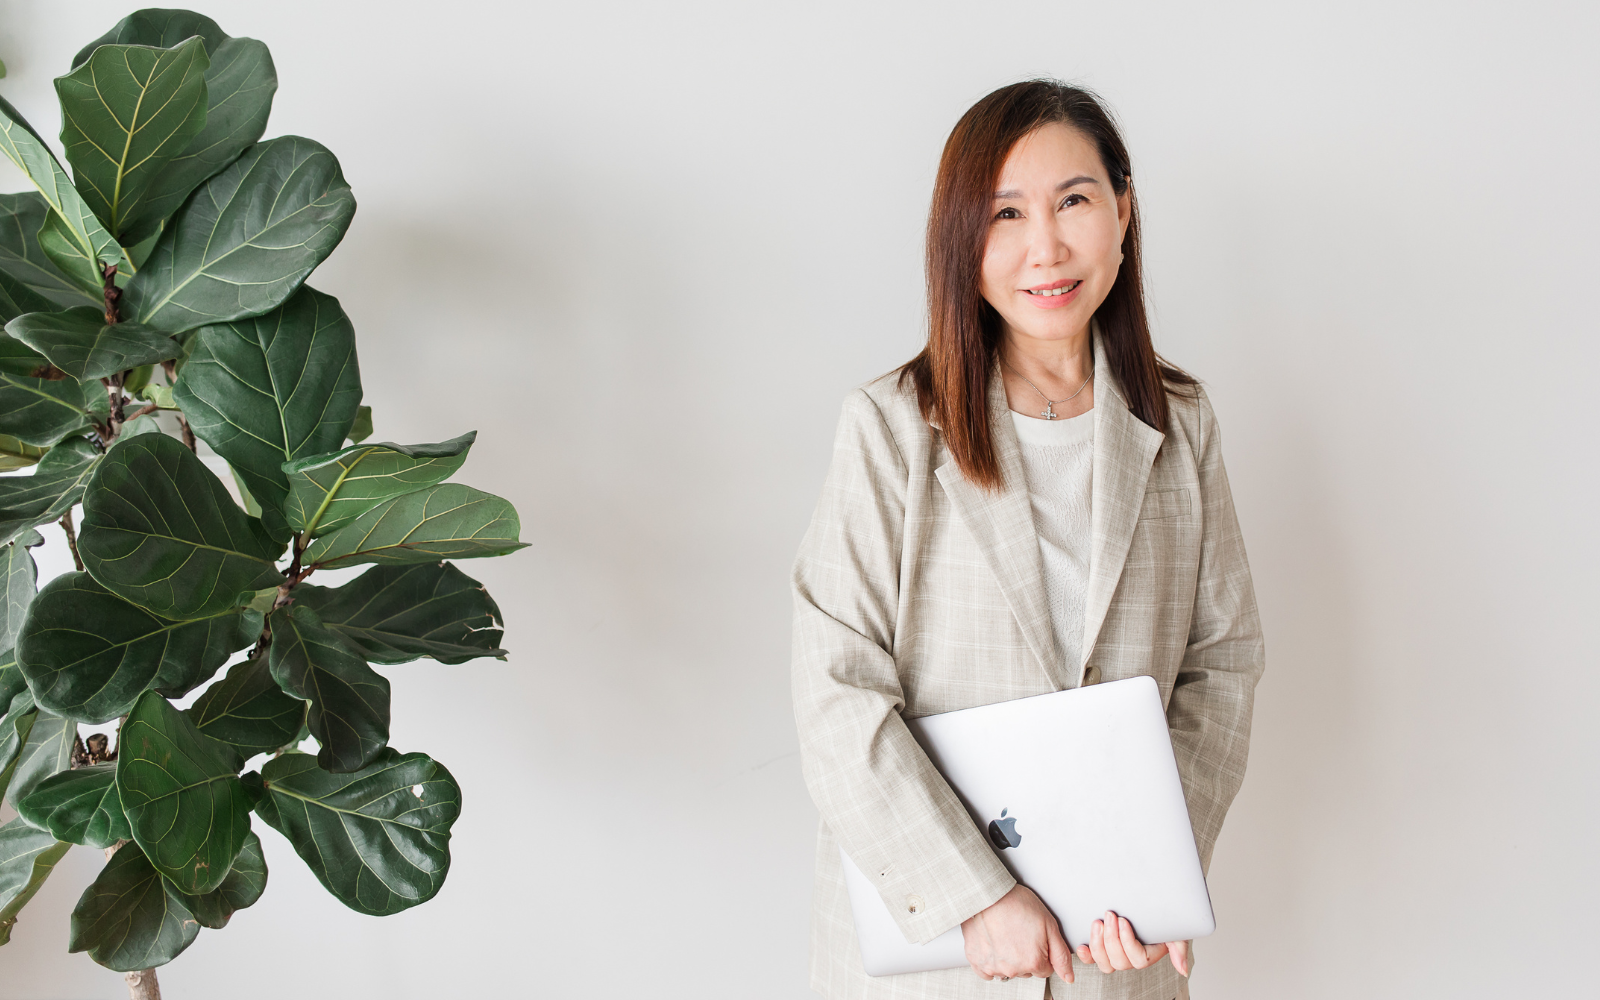 Mental Wellness for Entrepreneurs: Insights from Michelle Chan, Founder of MISEICO